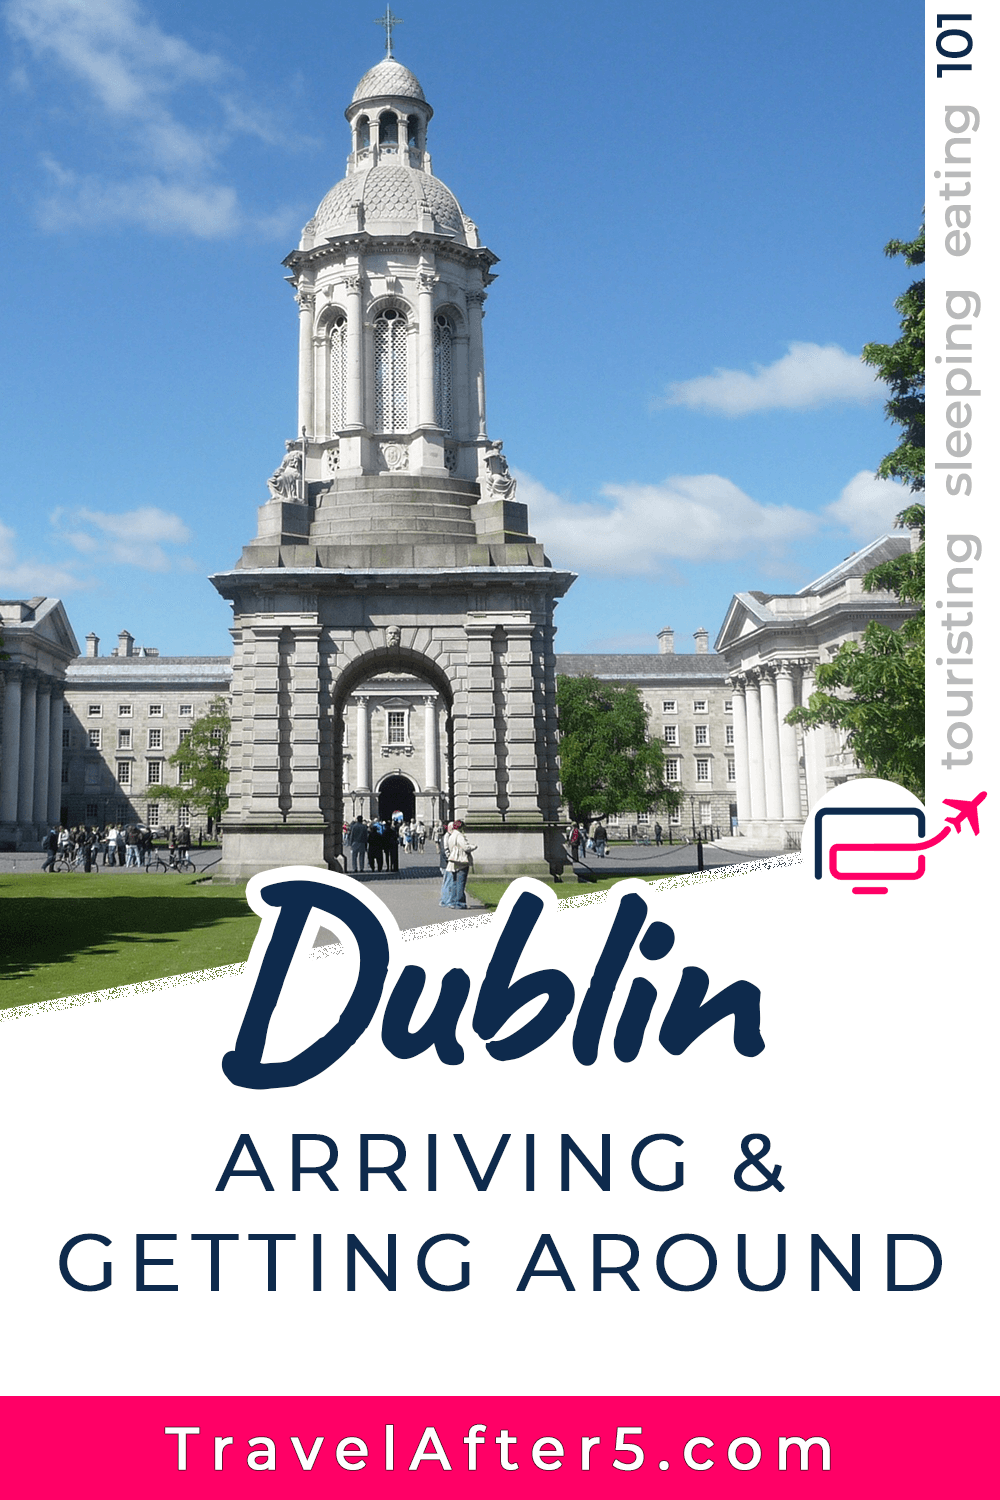 Pinterest Pin to Dublin 101, Arriving & Getting Around, by Travel After 5